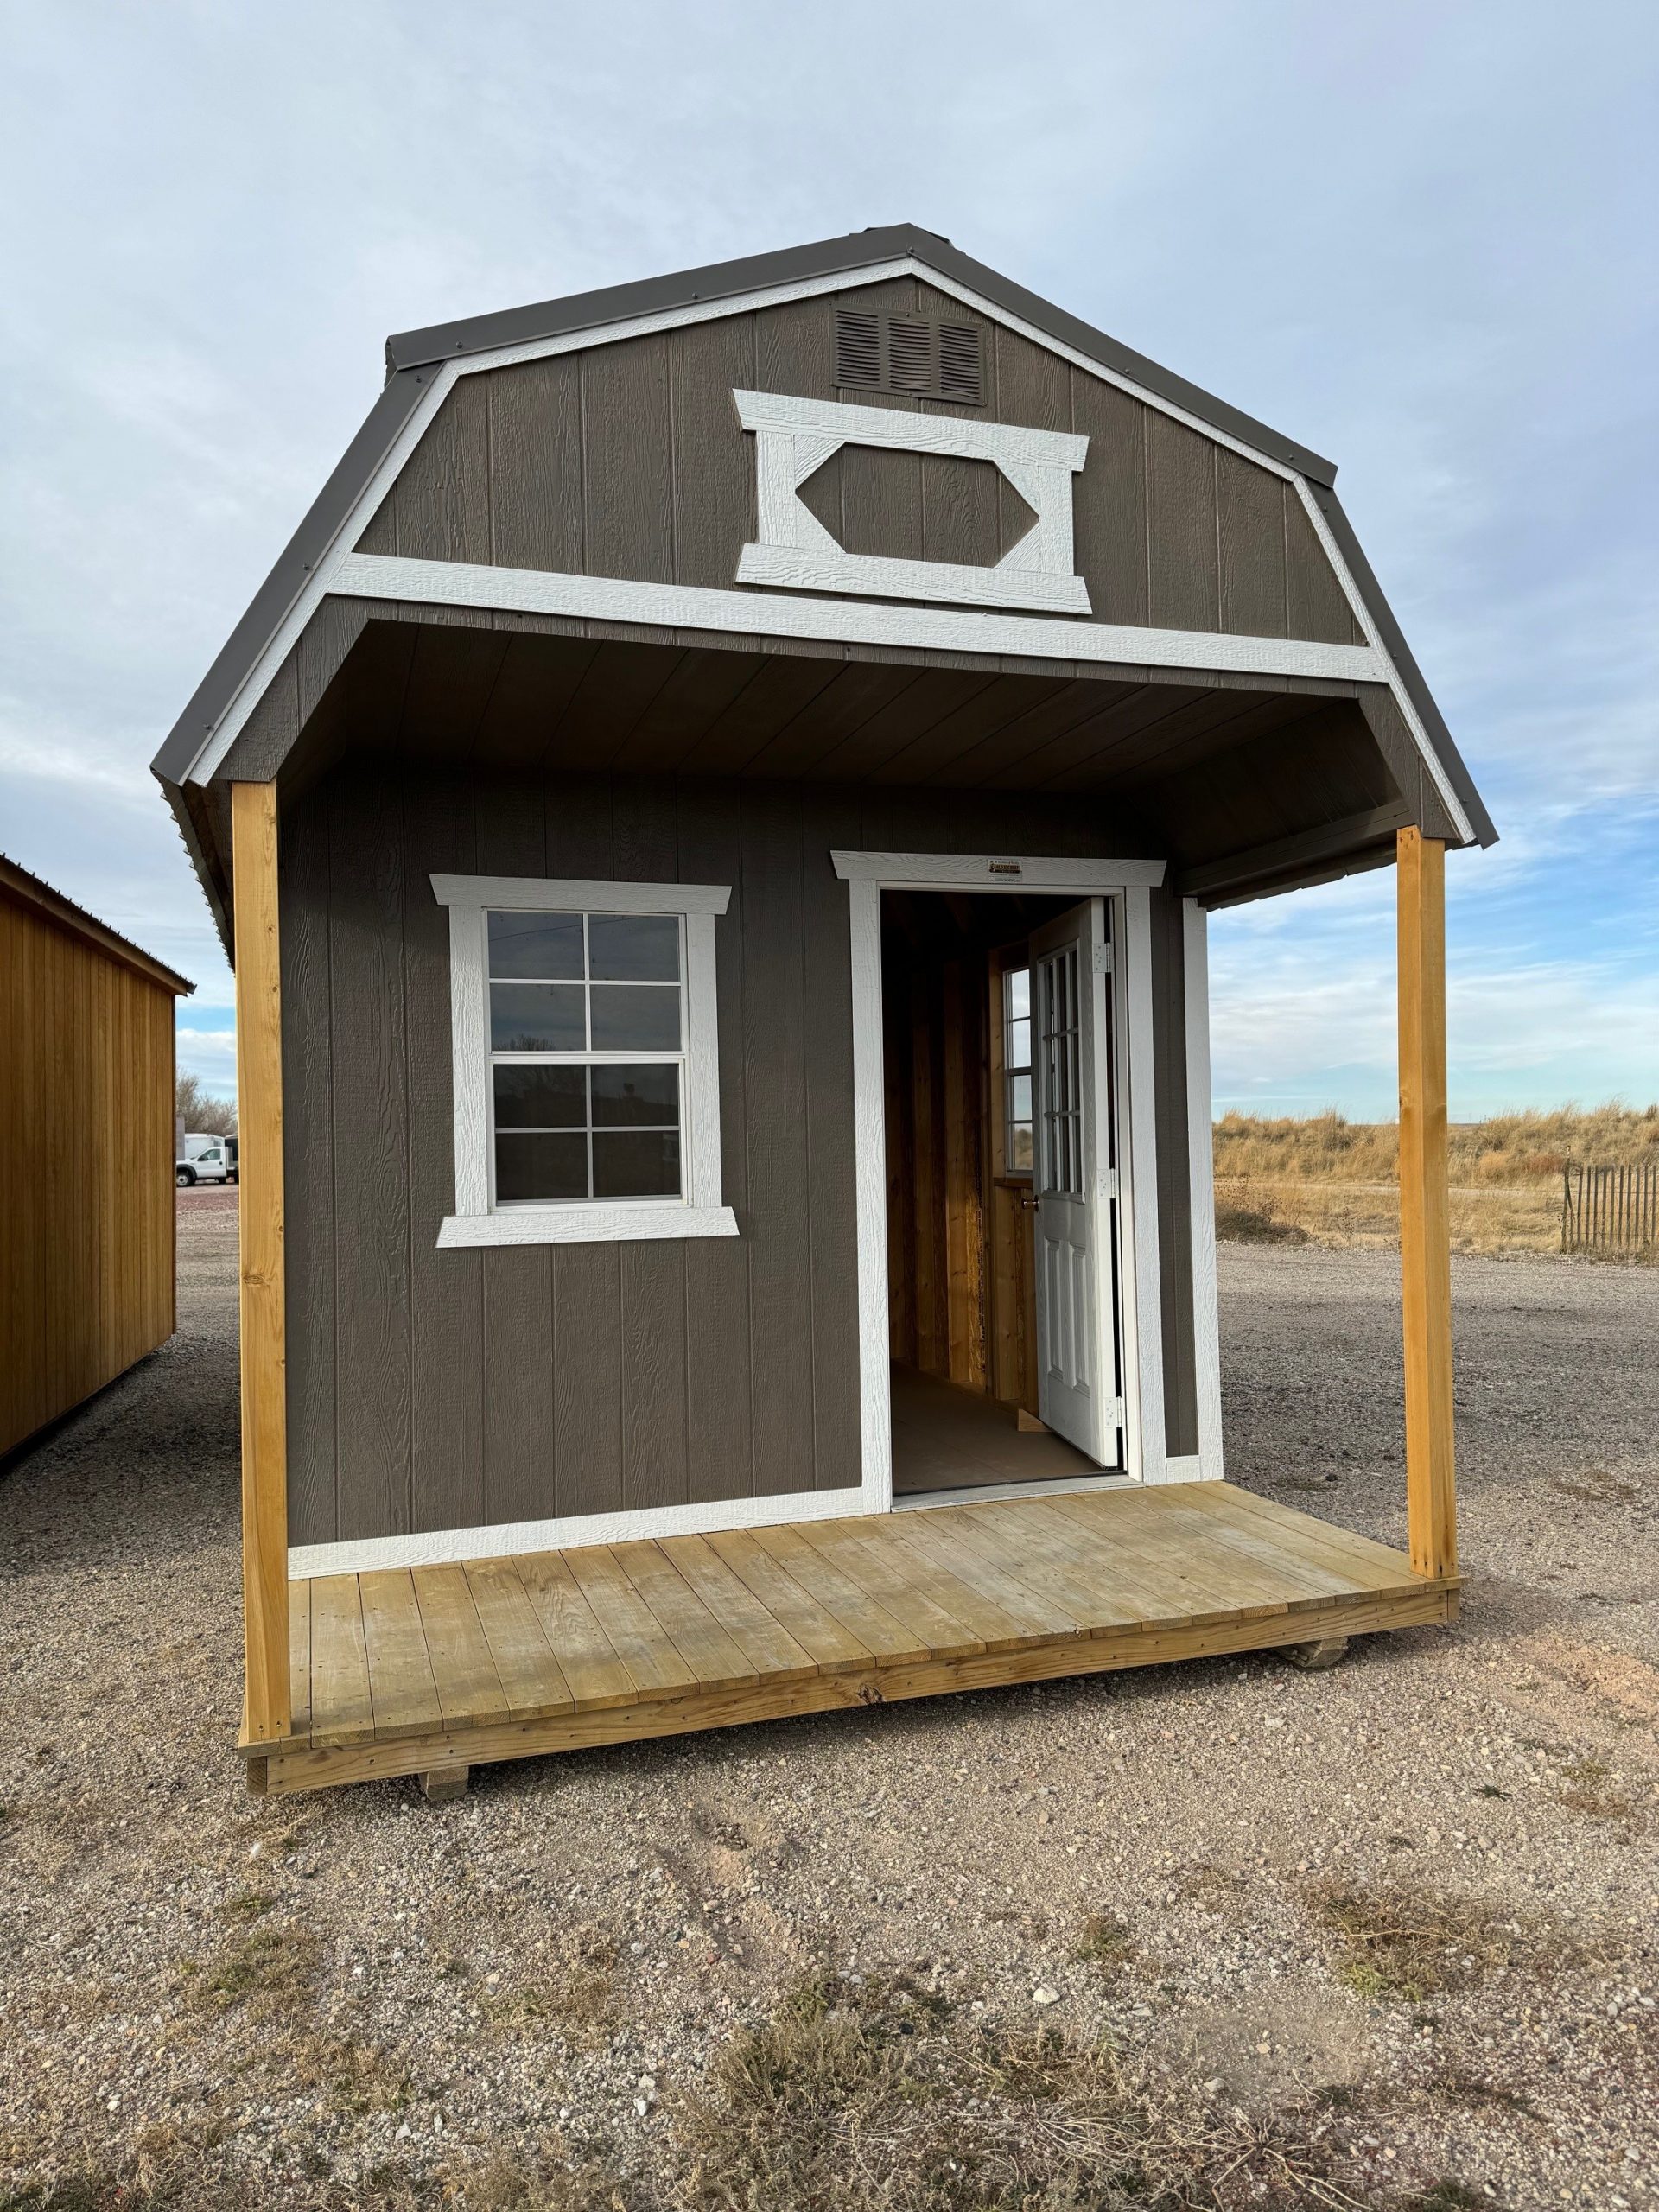 For Sale 10×20 Front Porch Shed For Sale Dark Ebony Urethane Paint Barn White Trim For Sale at French Creek Designs Shed Sales, Casper, Wyoming